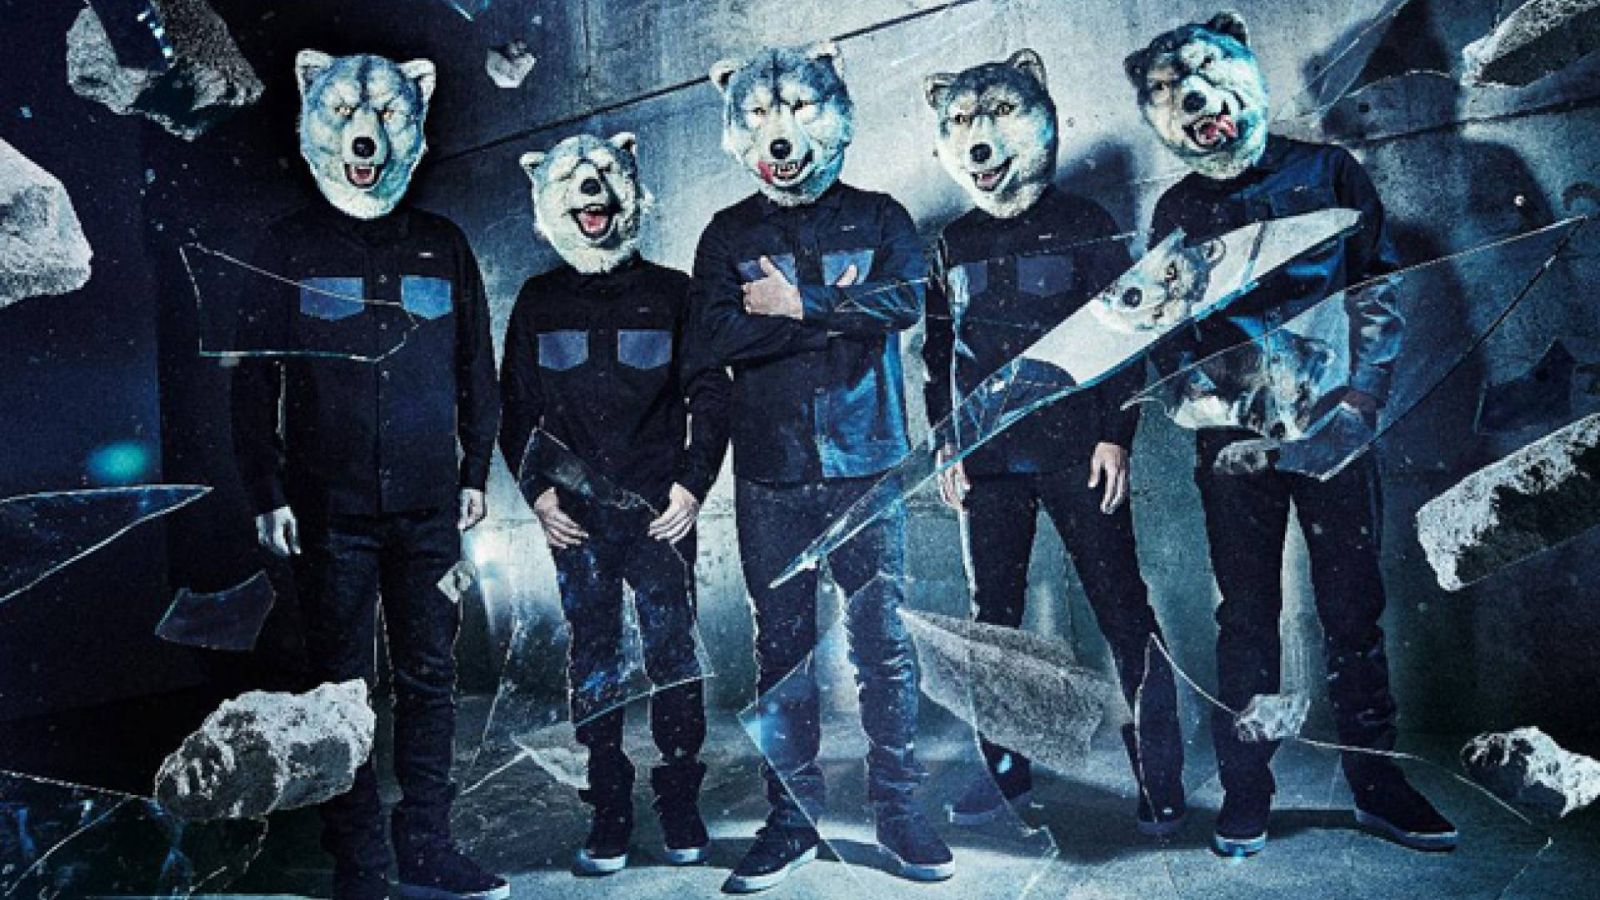 Nuevo álbum de MAN WITH A MISSION © Sony Music Entertainment (Japan) Inc. All rights reserved.